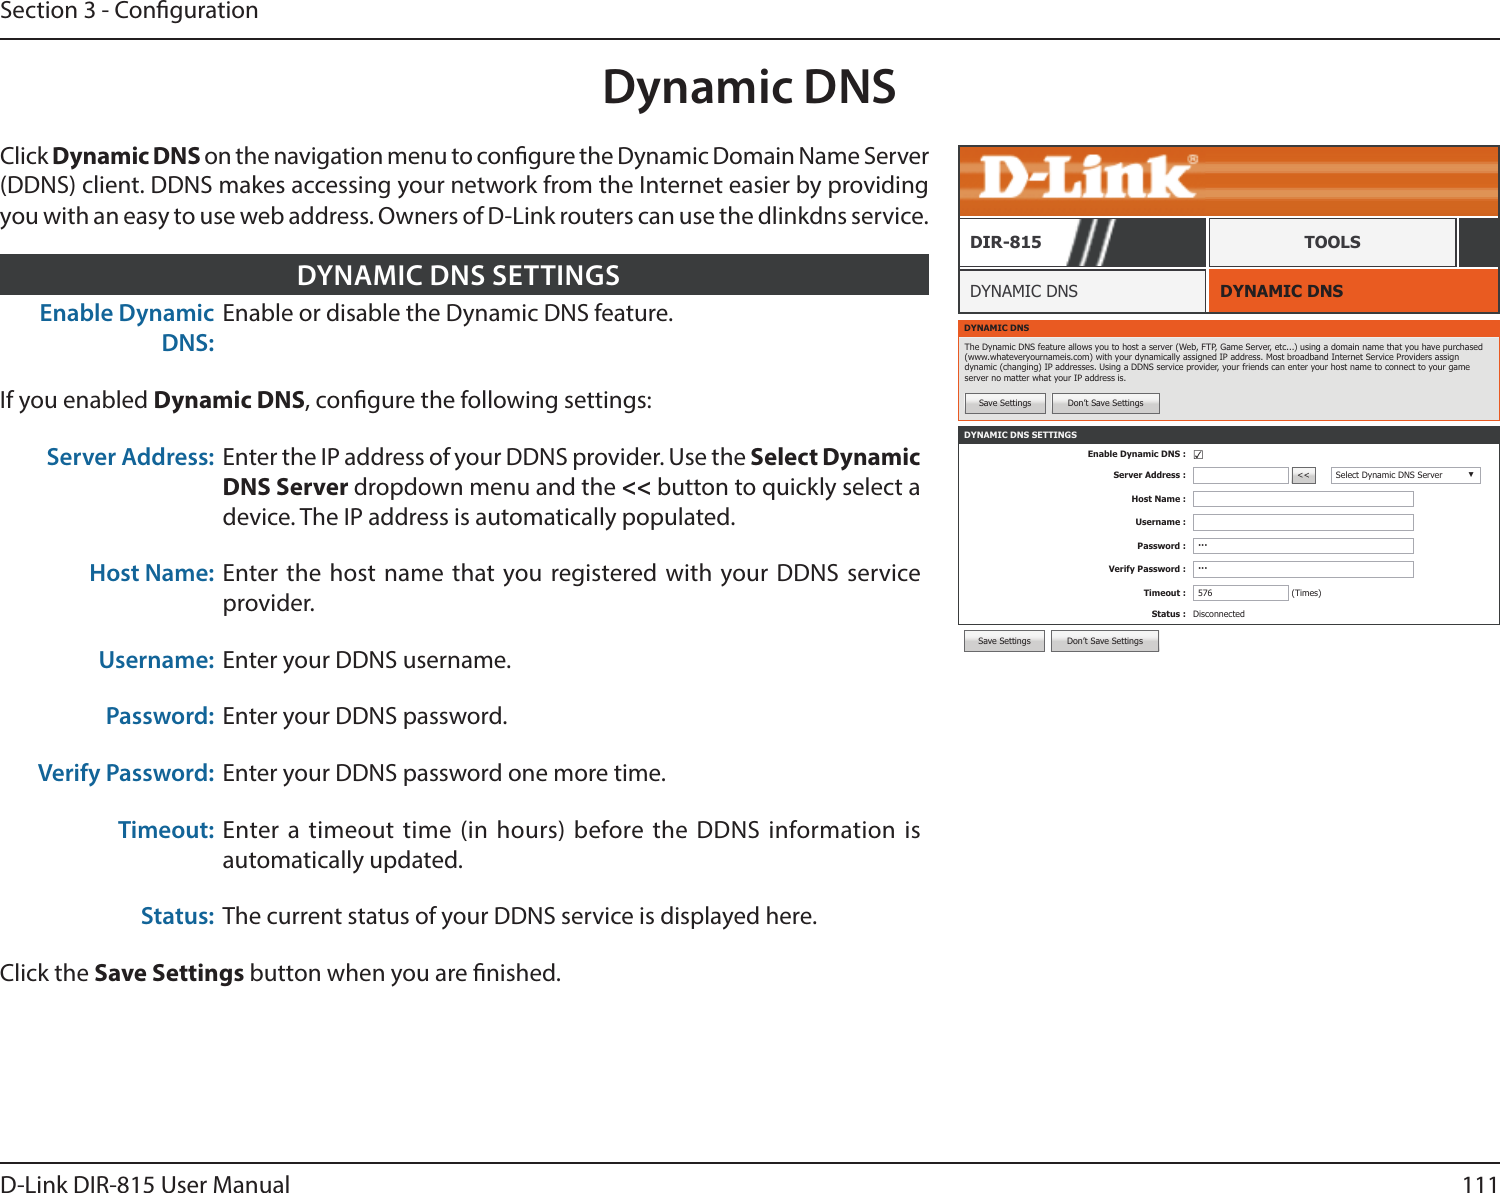 111D-Link DIR-815 User ManualSection 3 - CongurationDynamic DNSDYNAMIC DNSDYNAMIC DNSDIR-815 TOOLSClick Dynamic DNS on the navigation menu to congure the Dynamic Domain Name Server (DDNS) client. DDNS makes accessing your network from the Internet easier by providing you with an easy to use web address. Owners of D-Link routers can use the dlinkdns service.Enable Dynamic DNS:Enable or disable the Dynamic DNS feature.If you enabled Dynamic DNS, congure the following settings:Server Address: Enter the IP address of your DDNS provider. Use the Select Dynamic DNS Server dropdown menu and the &lt;&lt; button to quickly select a device. The IP address is automatically populated.Host Name: Enter the host name that you registered with your DDNS service provider.Username: Enter your DDNS username.Password: Enter your DDNS password.Verify Password: Enter your DDNS password one more time.Timeout: Enter a timeout time (in hours) before the DDNS information is automatically updated.Status: The current status of your DDNS service is displayed here.Click the Save Settings button when you are nished.DYNAMIC DNS SETTINGSDYNAMIC DNSThe Dynamic DNS feature allows you to host a server (Web, FTP, Game Server, etc...) using a domain name that you have purchased (www.whateveryournameis.com) with your dynamically assigned IP address. Most broadband Internet Service Providers assign dynamic (changing) IP addresses. Using a DDNS service provider, your friends can enter your host name to connect to your game server no matter what your IP address is.Save Settings Don’t Save SettingsDYNAMIC DNS SETTINGSEnable Dynamic DNS : ☑Server Address : &lt;&lt; Select Dynamic DNS Server ▼Host Name :Username :Password : ···Verify Password : ···Timeout : 576 (Times)Status : DisconnectedSave Settings Don’t Save Settings